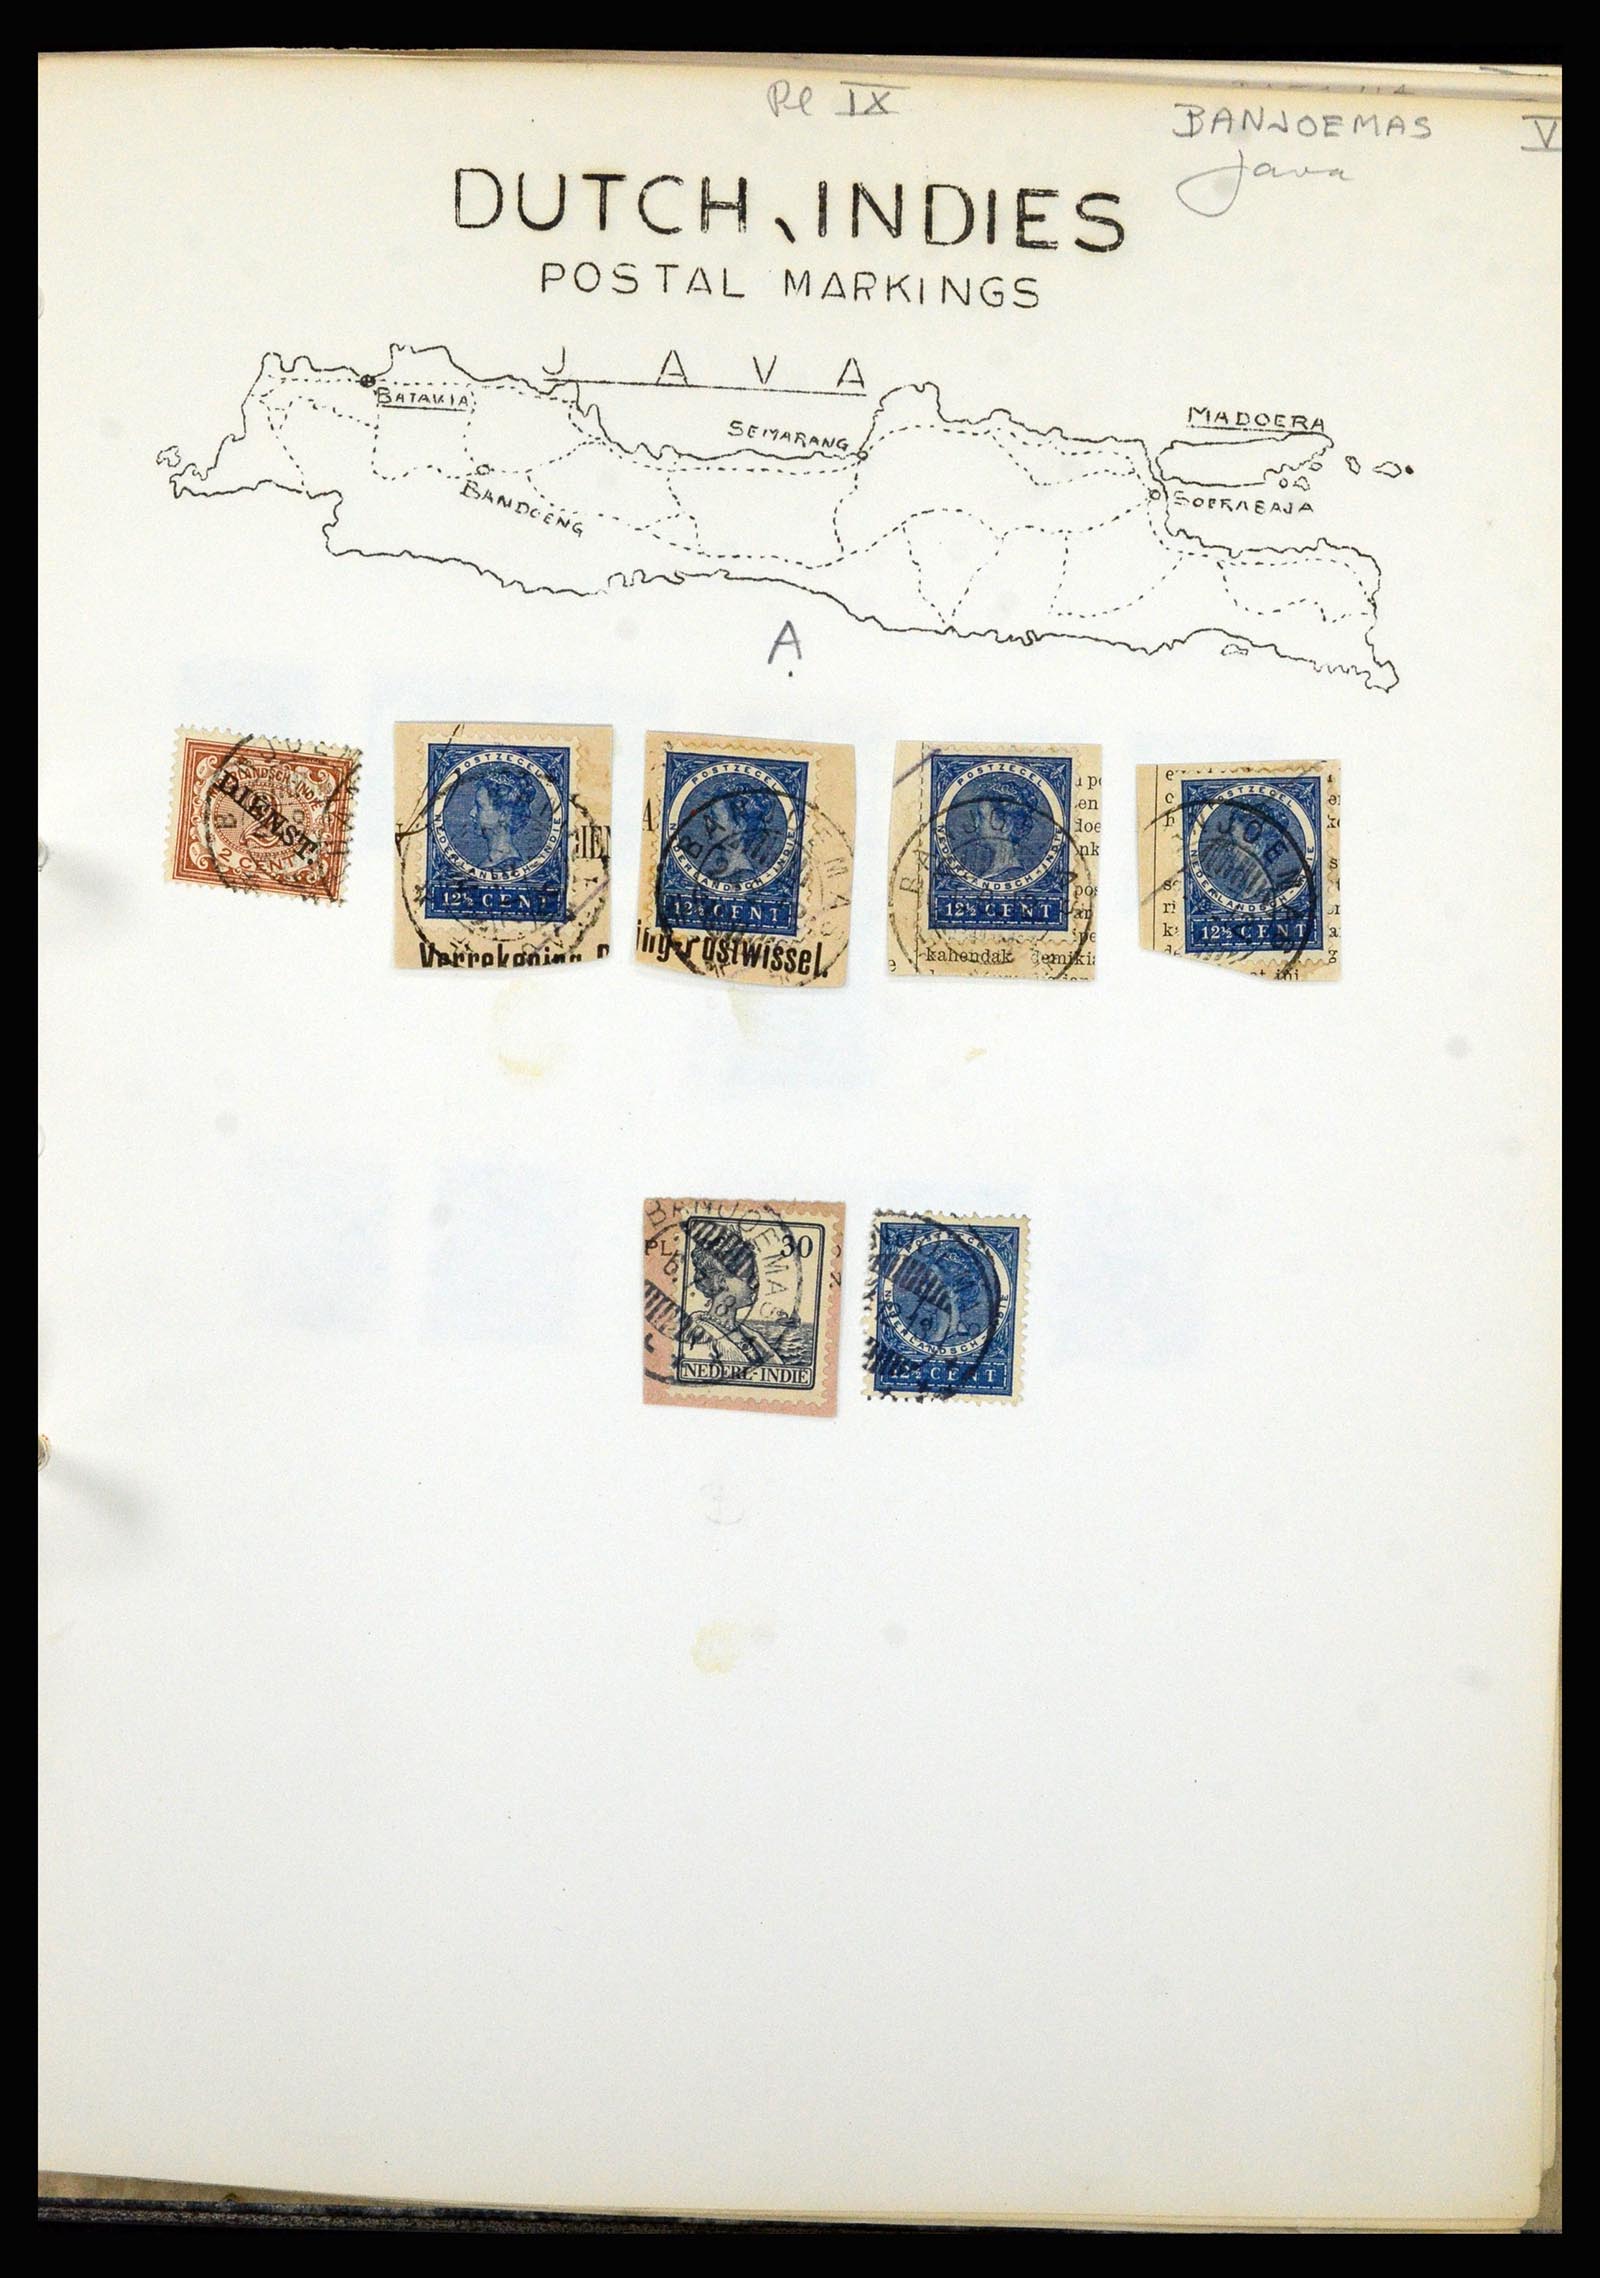 36841 011 - Stamp collection 36841 Dutch east Indies short bar cancels.